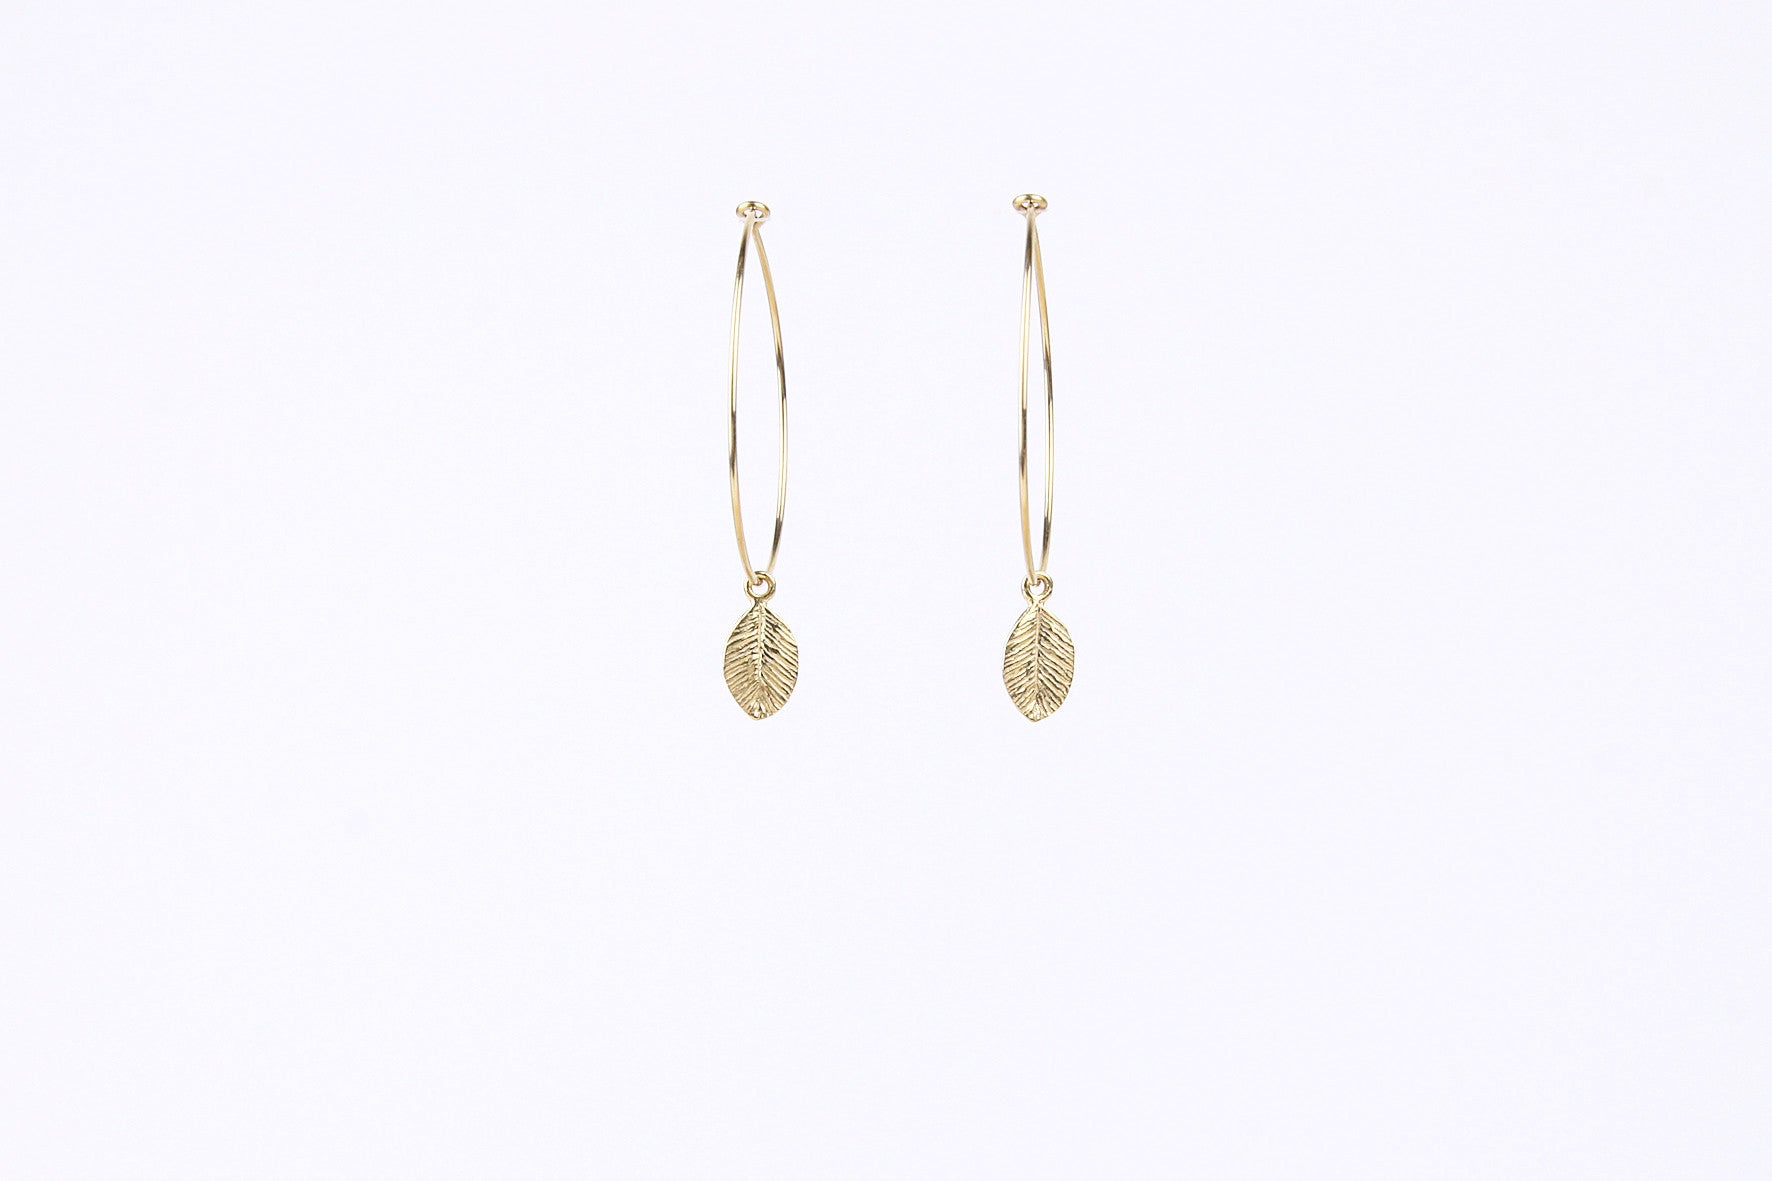 jewelberry ohrringe earrings tiny leaf hoops gold plated sterling silver fine jewelry handmade with love fairtrade